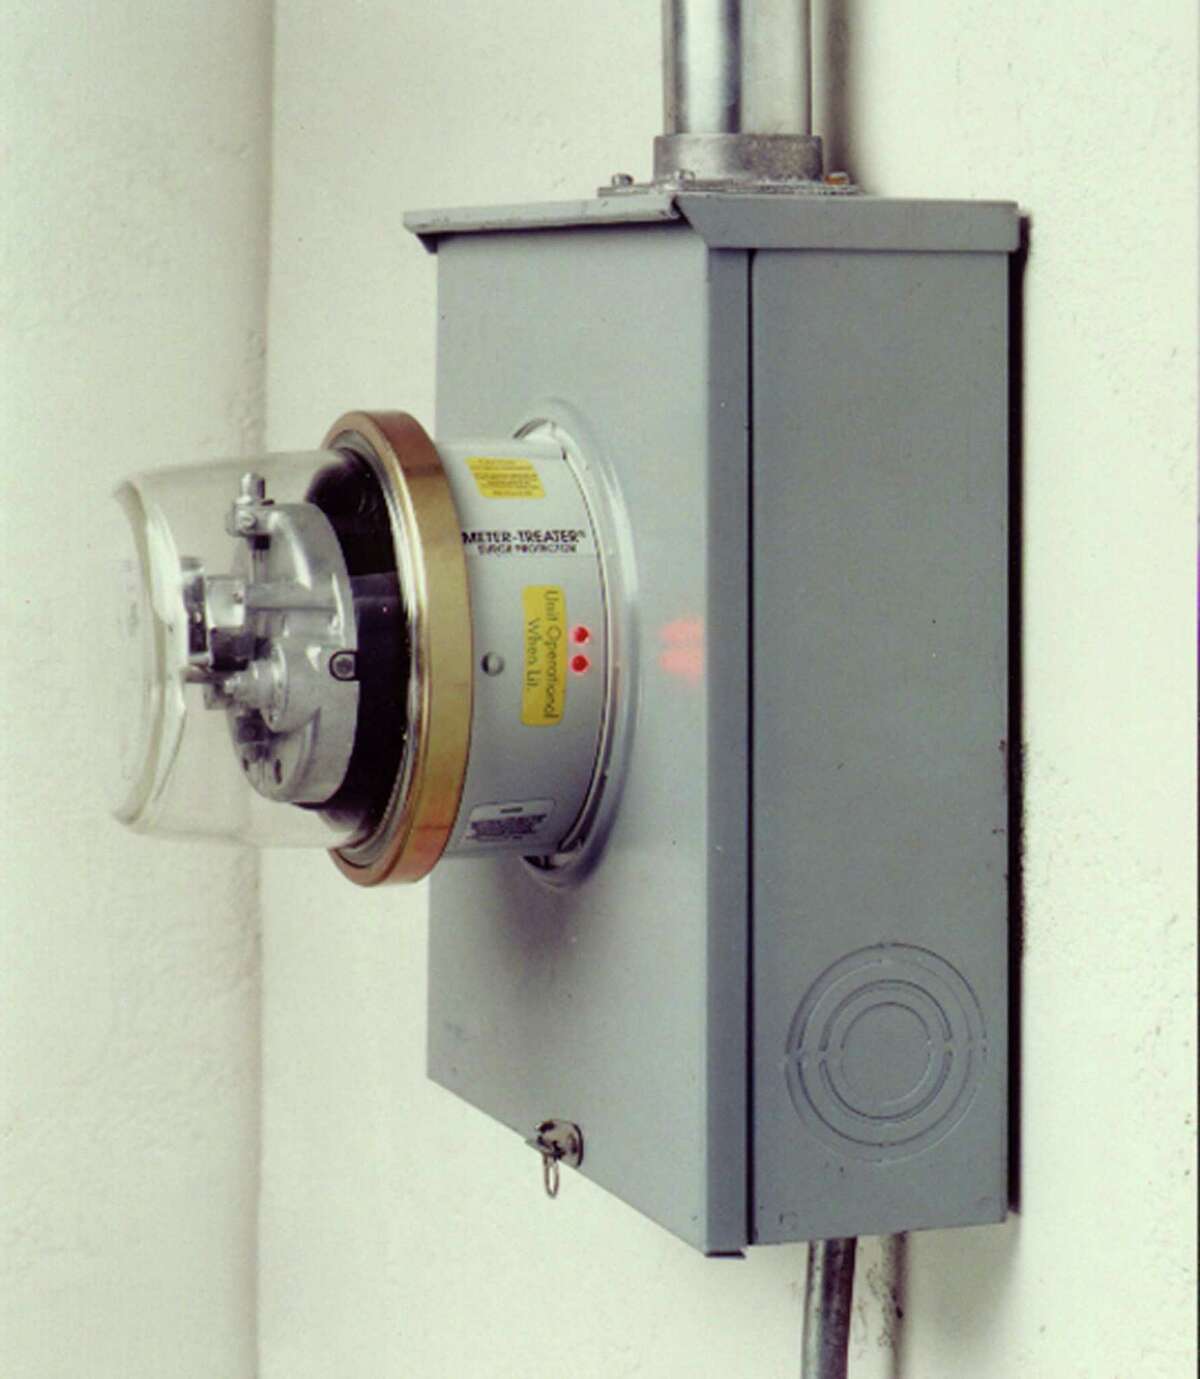 An electric meter